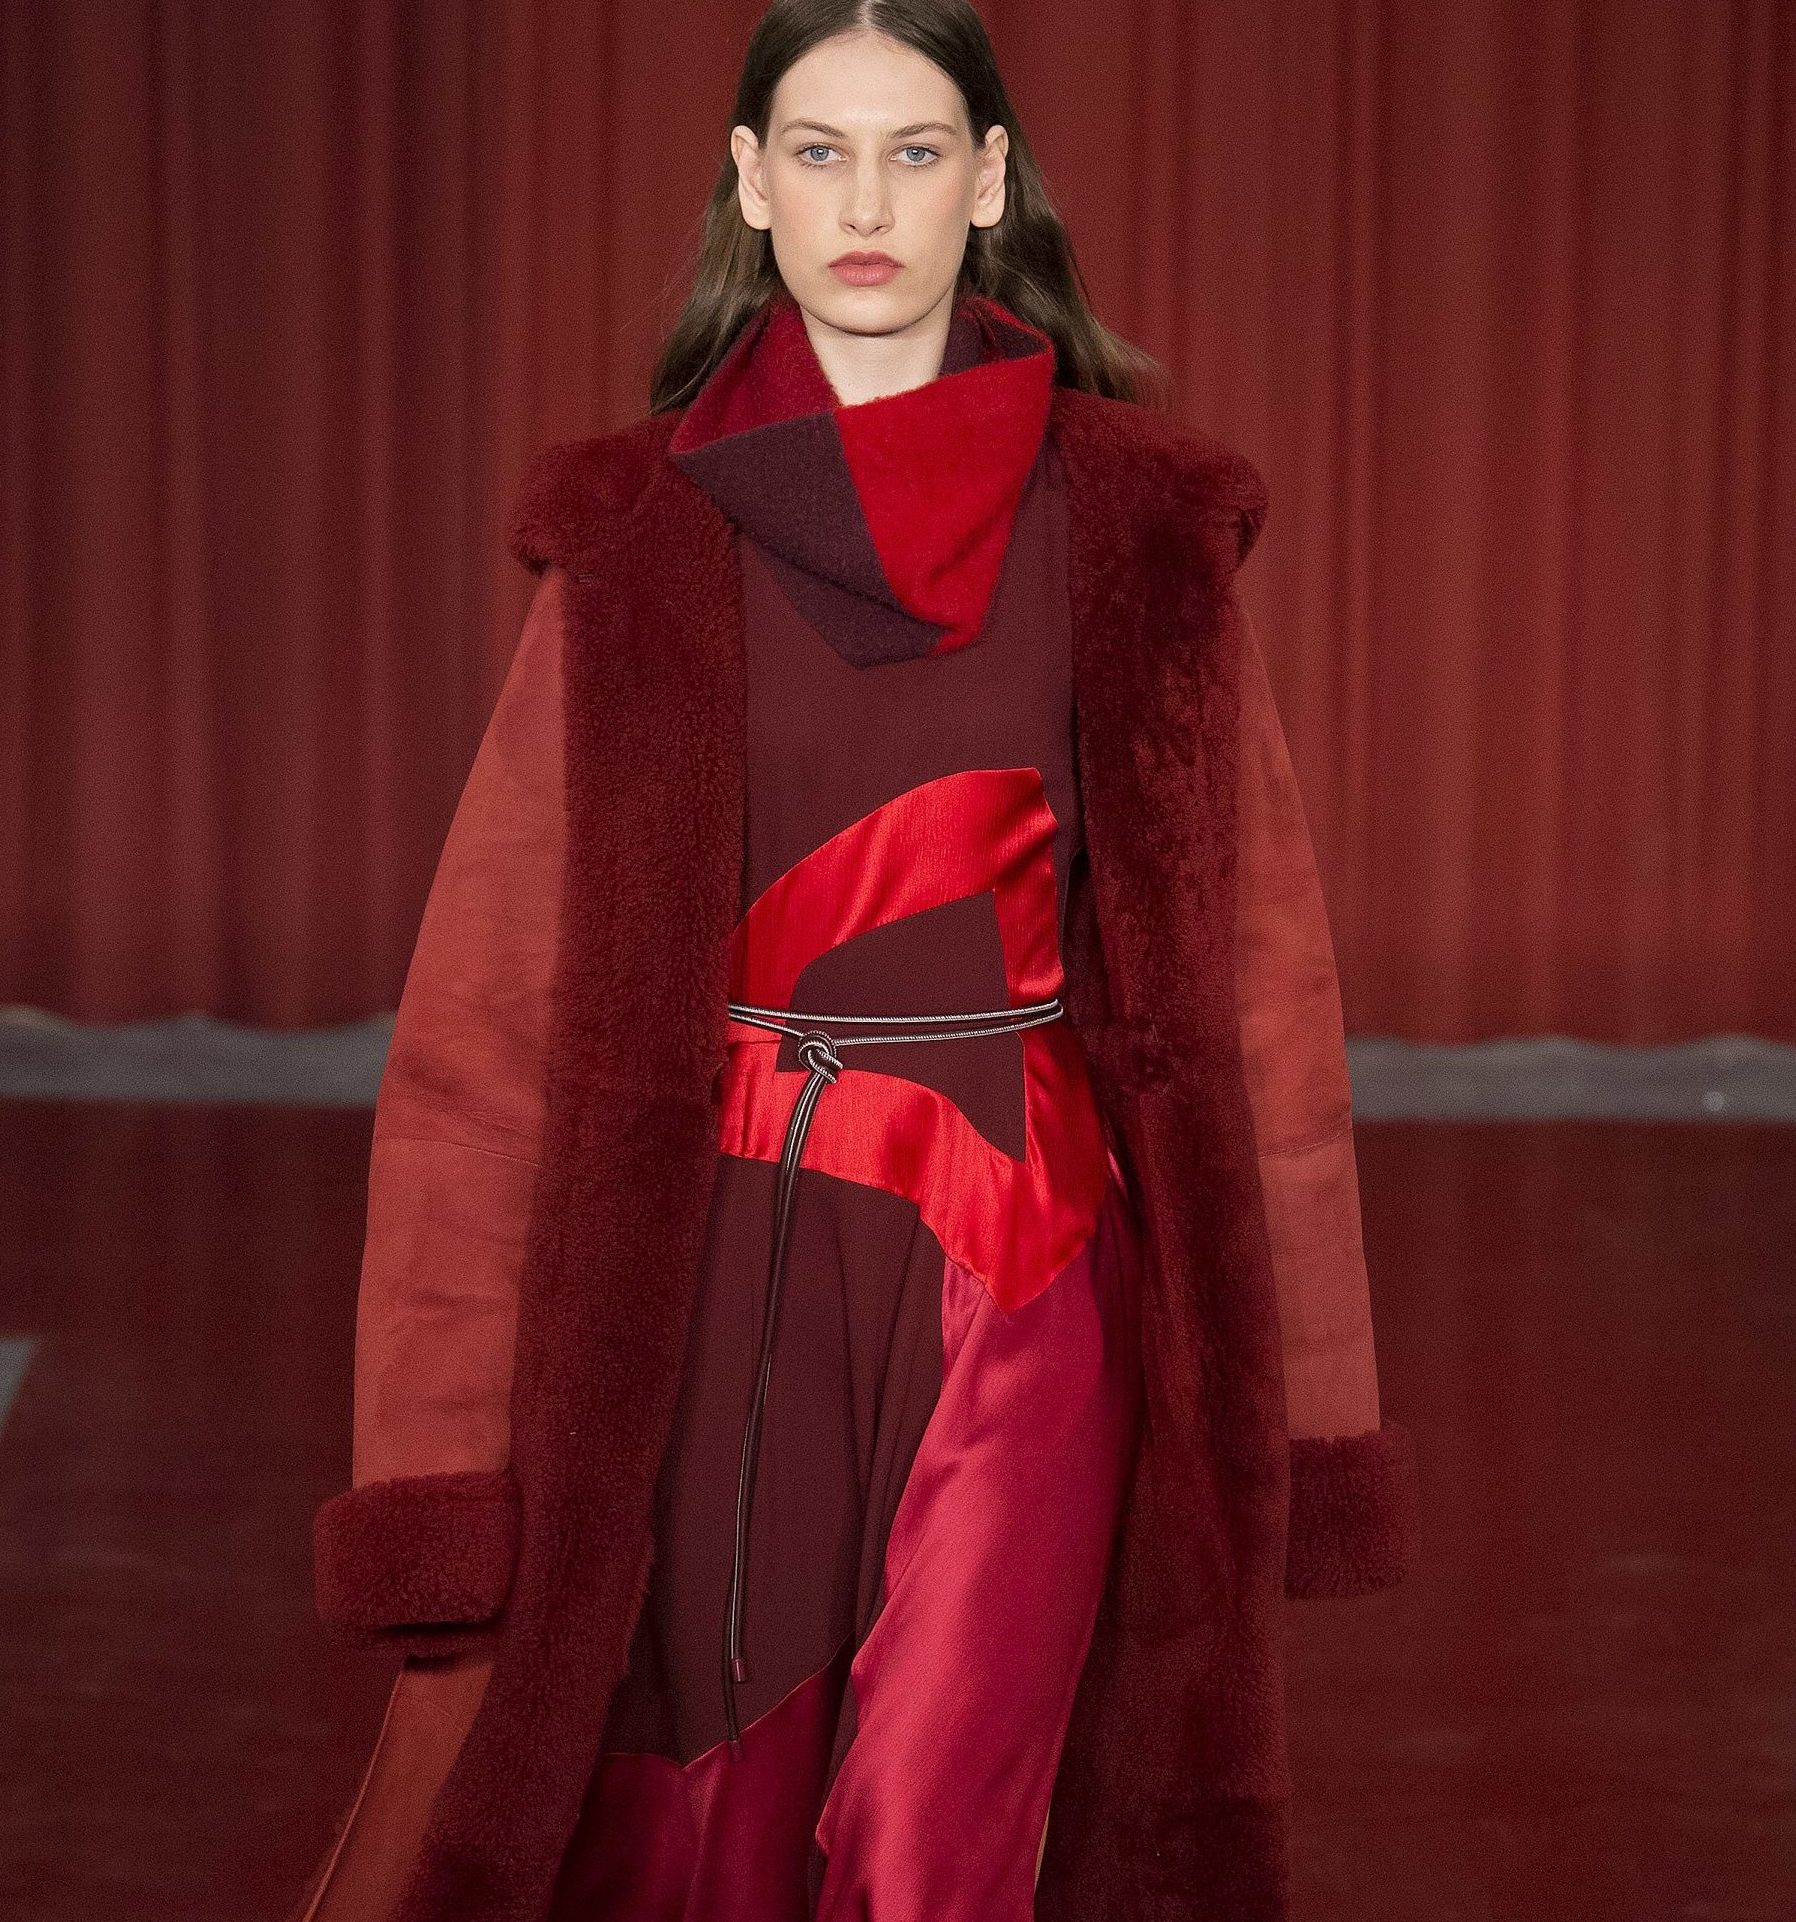 The Historical Color of Passion, Rubies, Fall/Winter 2017/18 Trends and ...